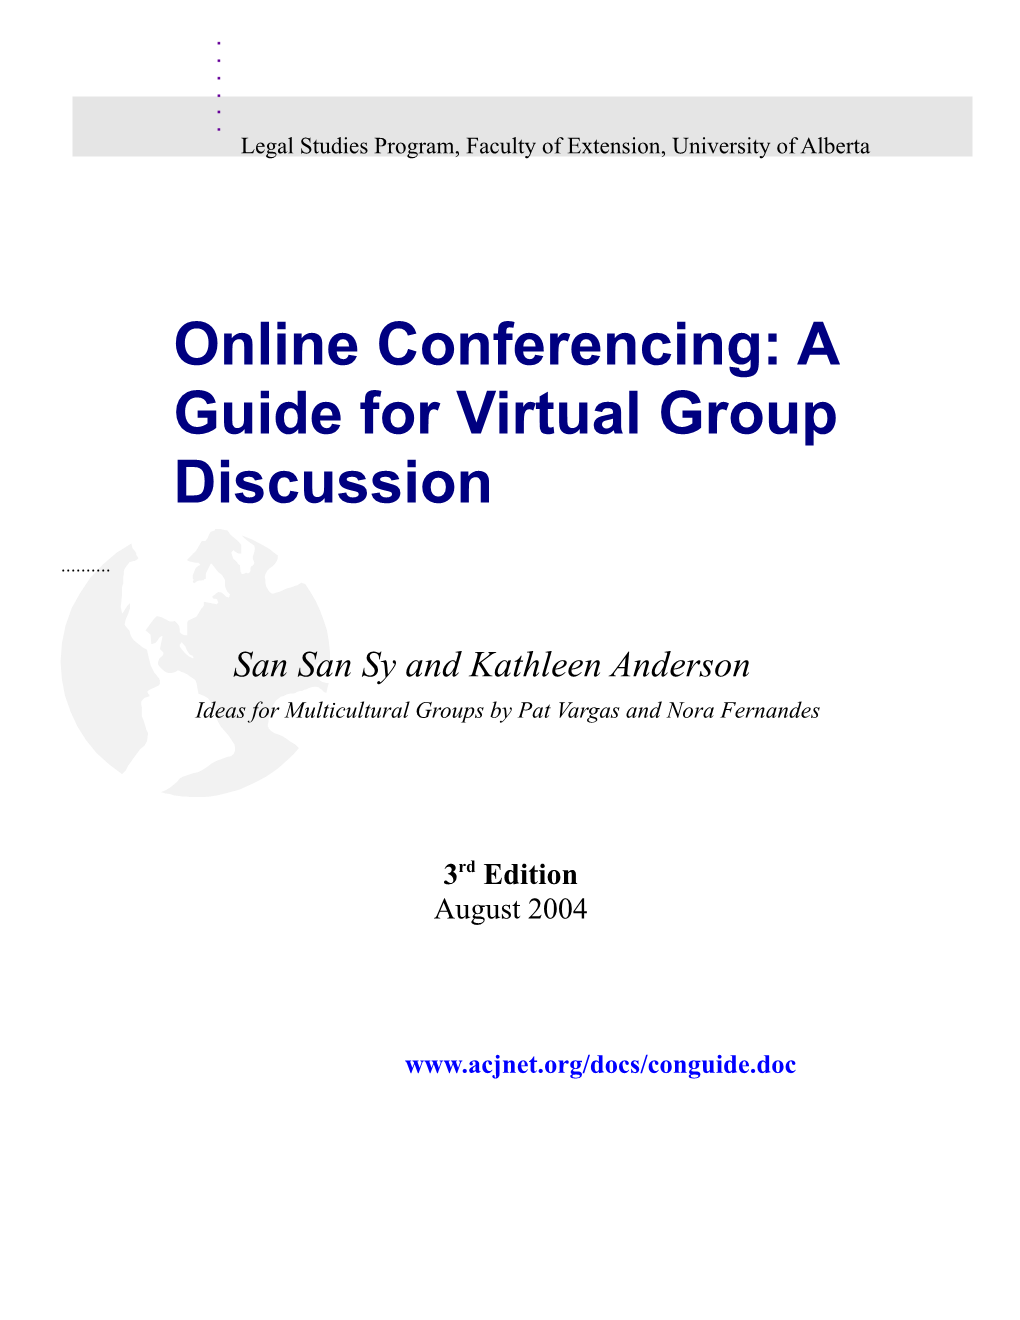 Online Conferencing: a Guide for Virtual Group Discussion